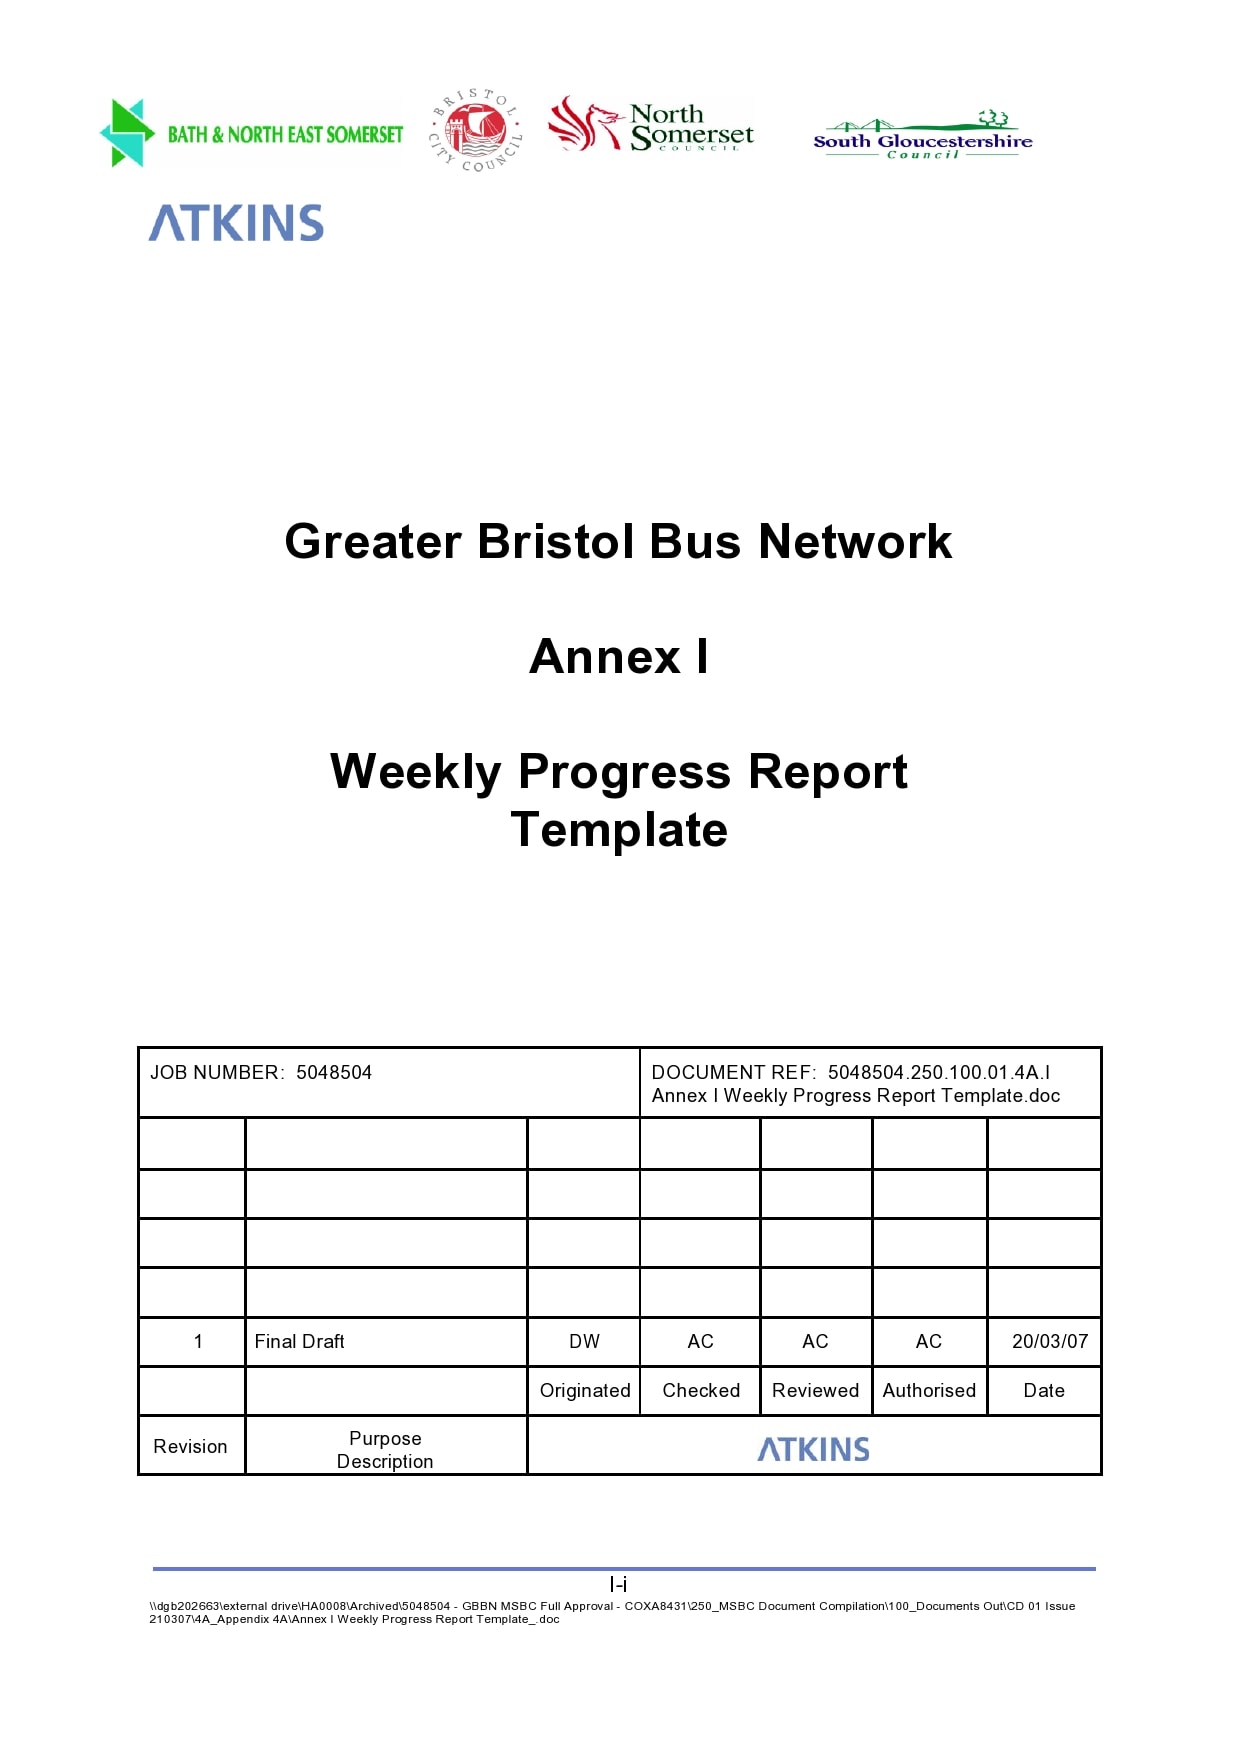 24 Professional Progress Report Templates (Free) - TemplateArchive Intended For Educational Progress Report Template